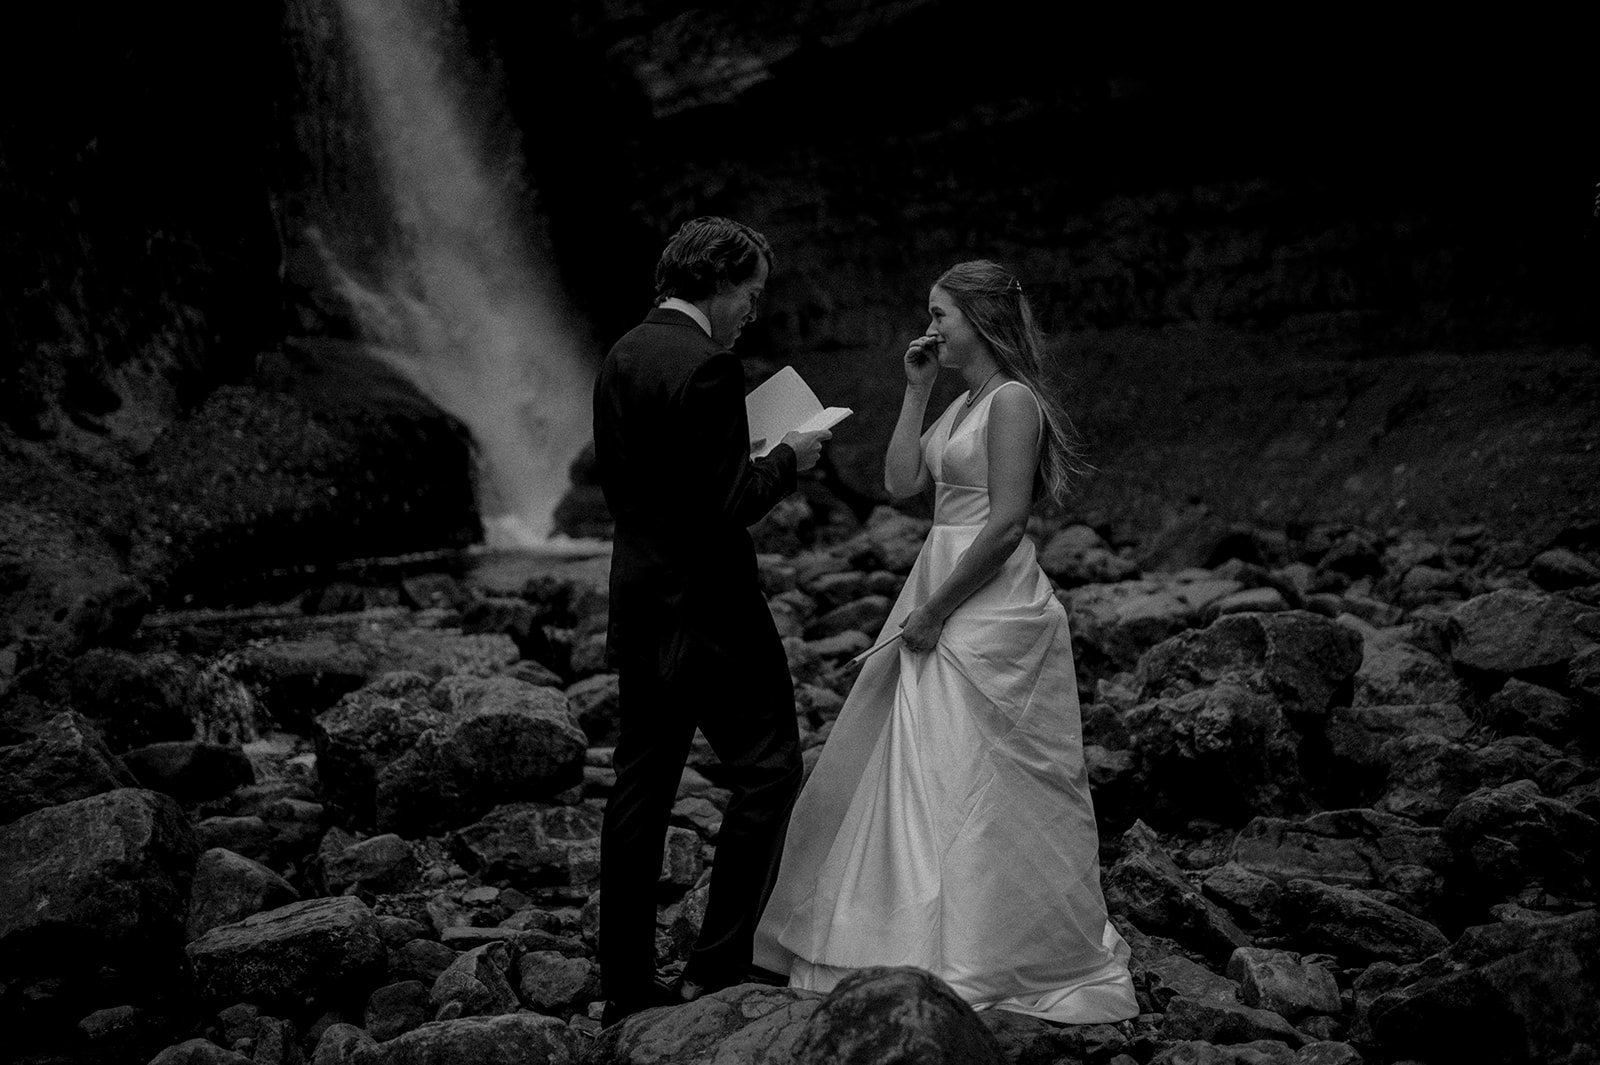 moody intimate pictured rocks national lakeshore elopement